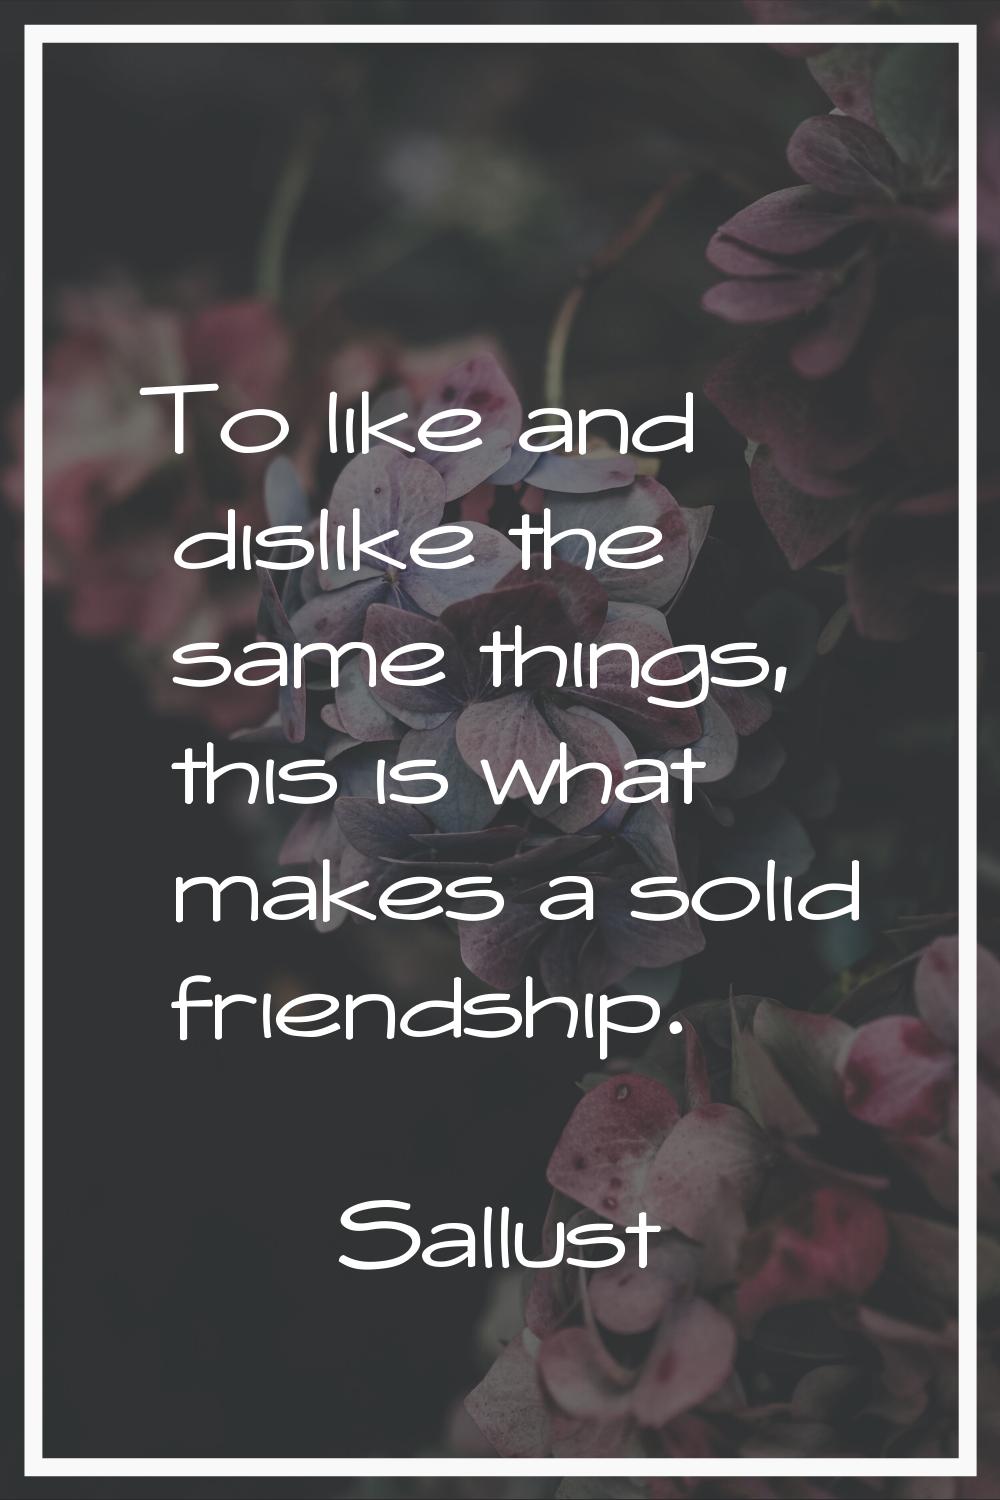 To like and dislike the same things, this is what makes a solid friendship.